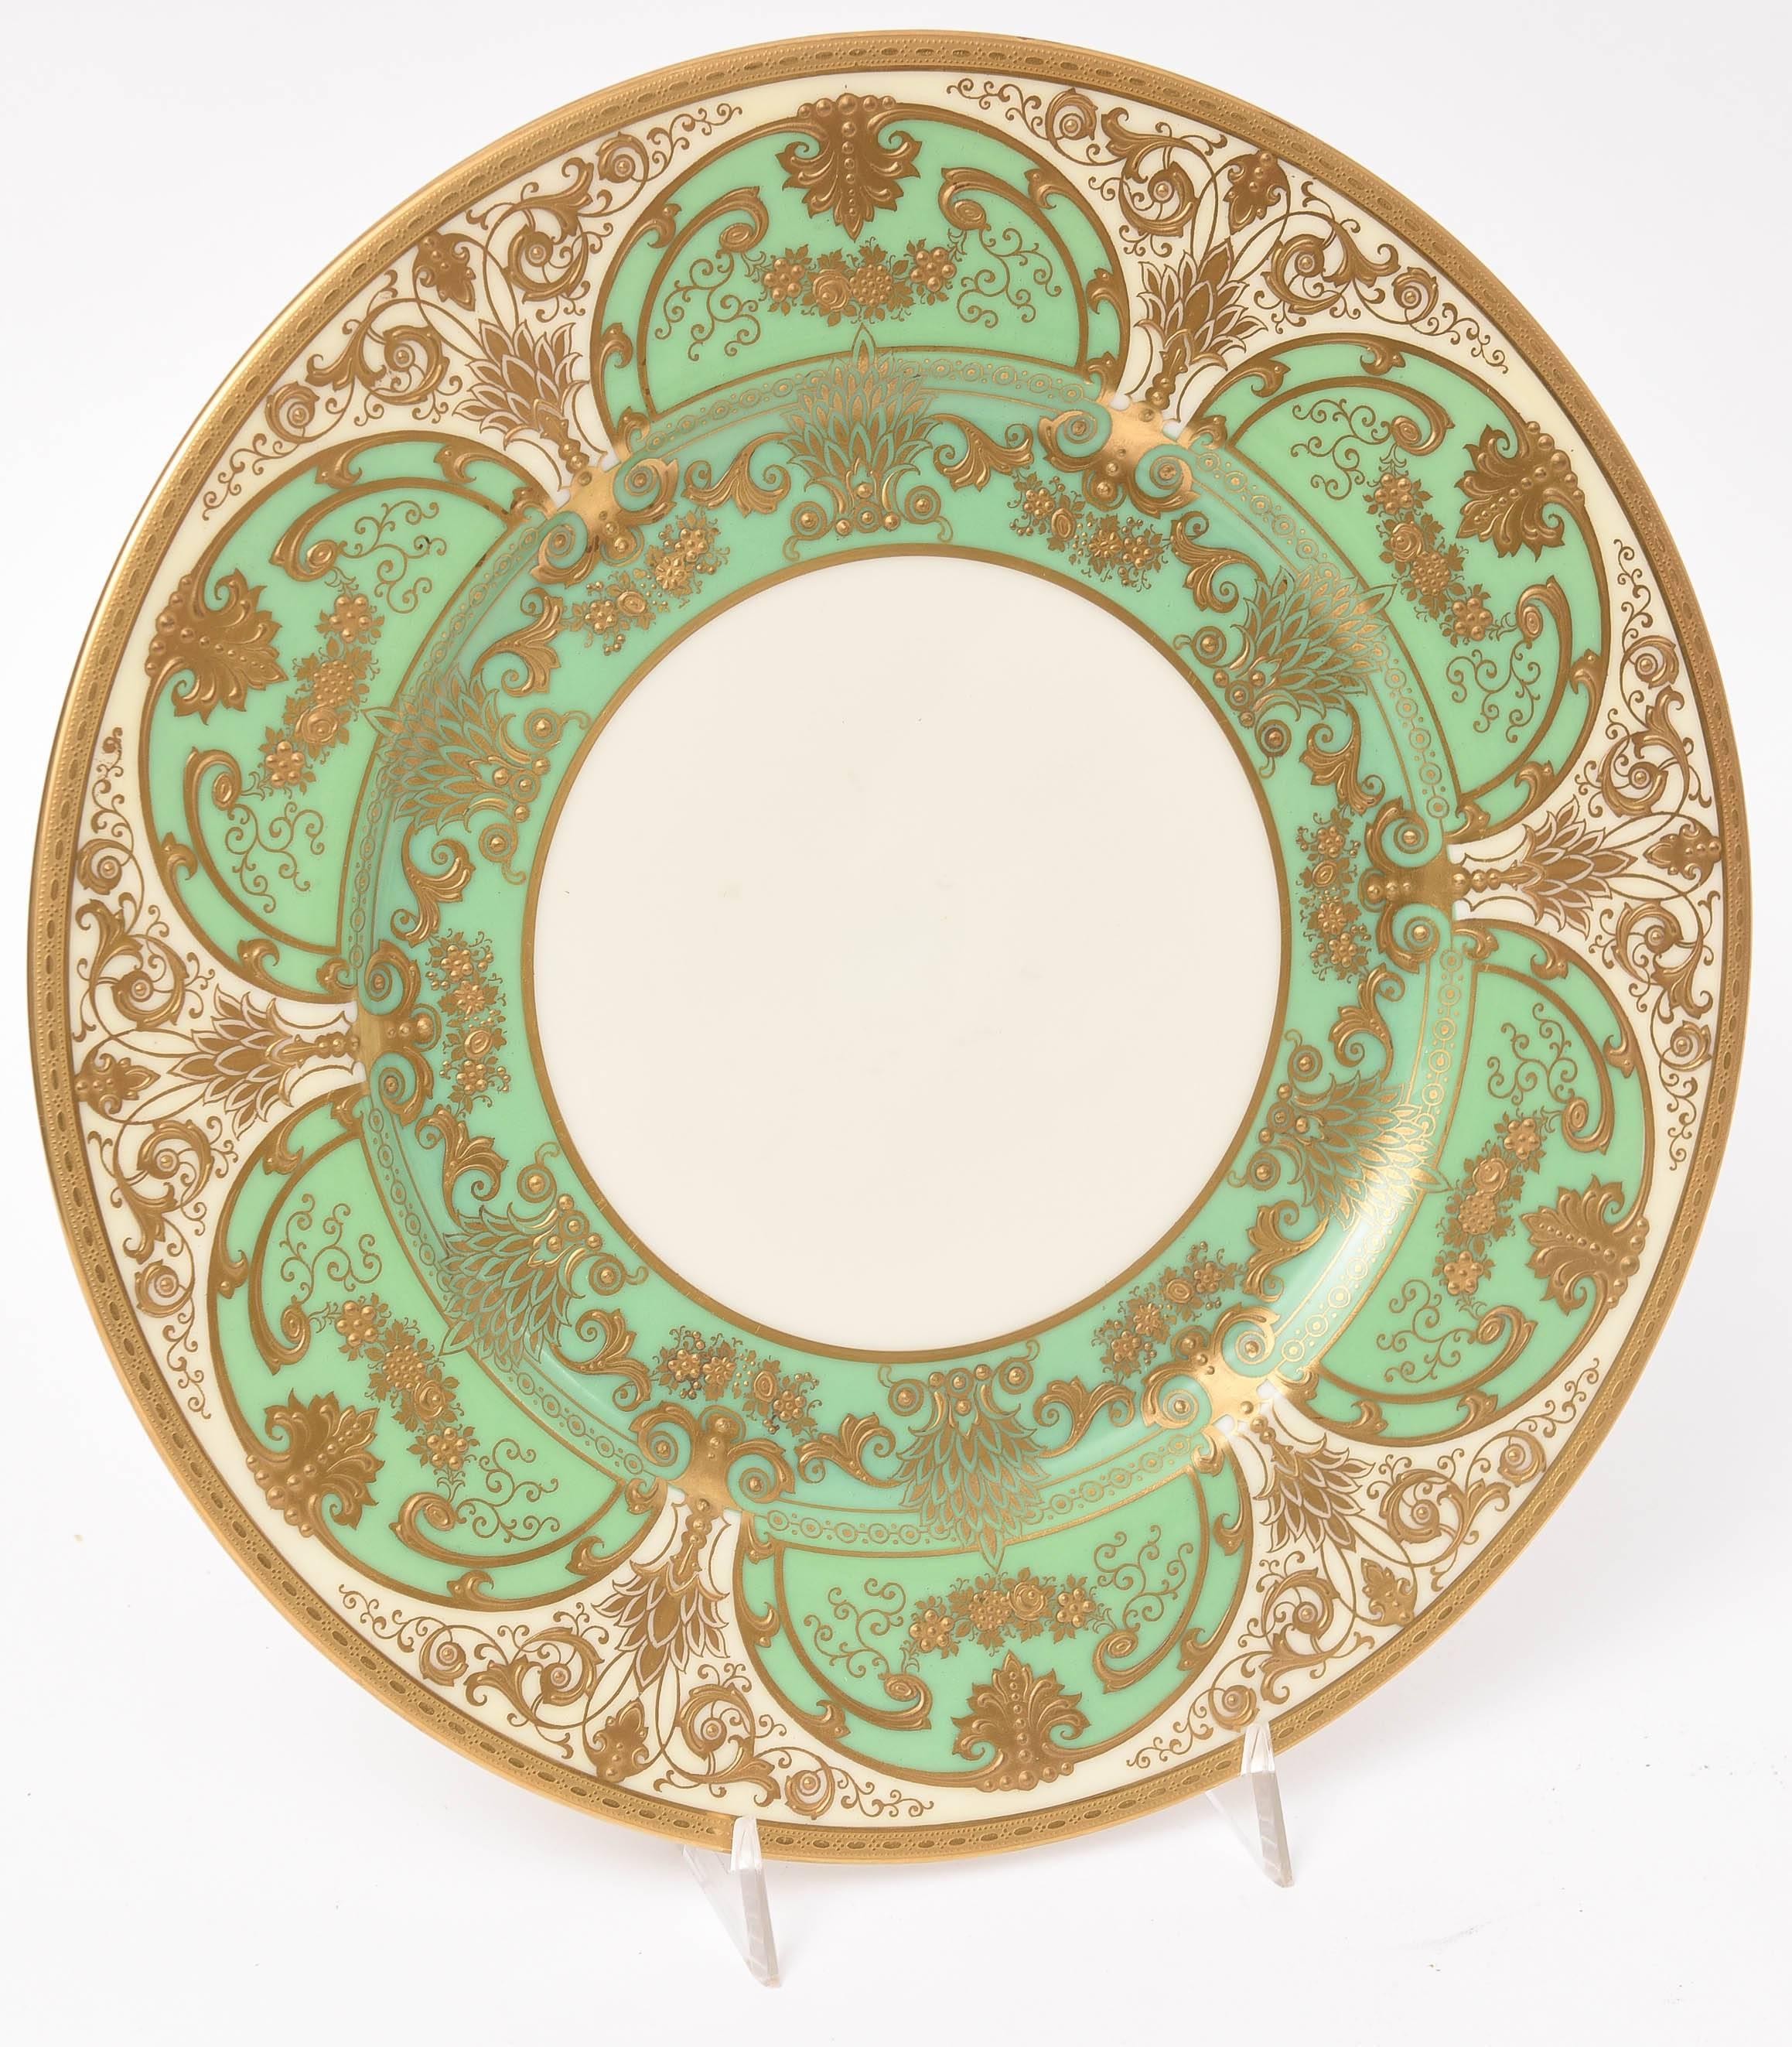 Porcelain 12 Elaborate Green and Raised Gold Encrusted Presentation or Dinner Plates